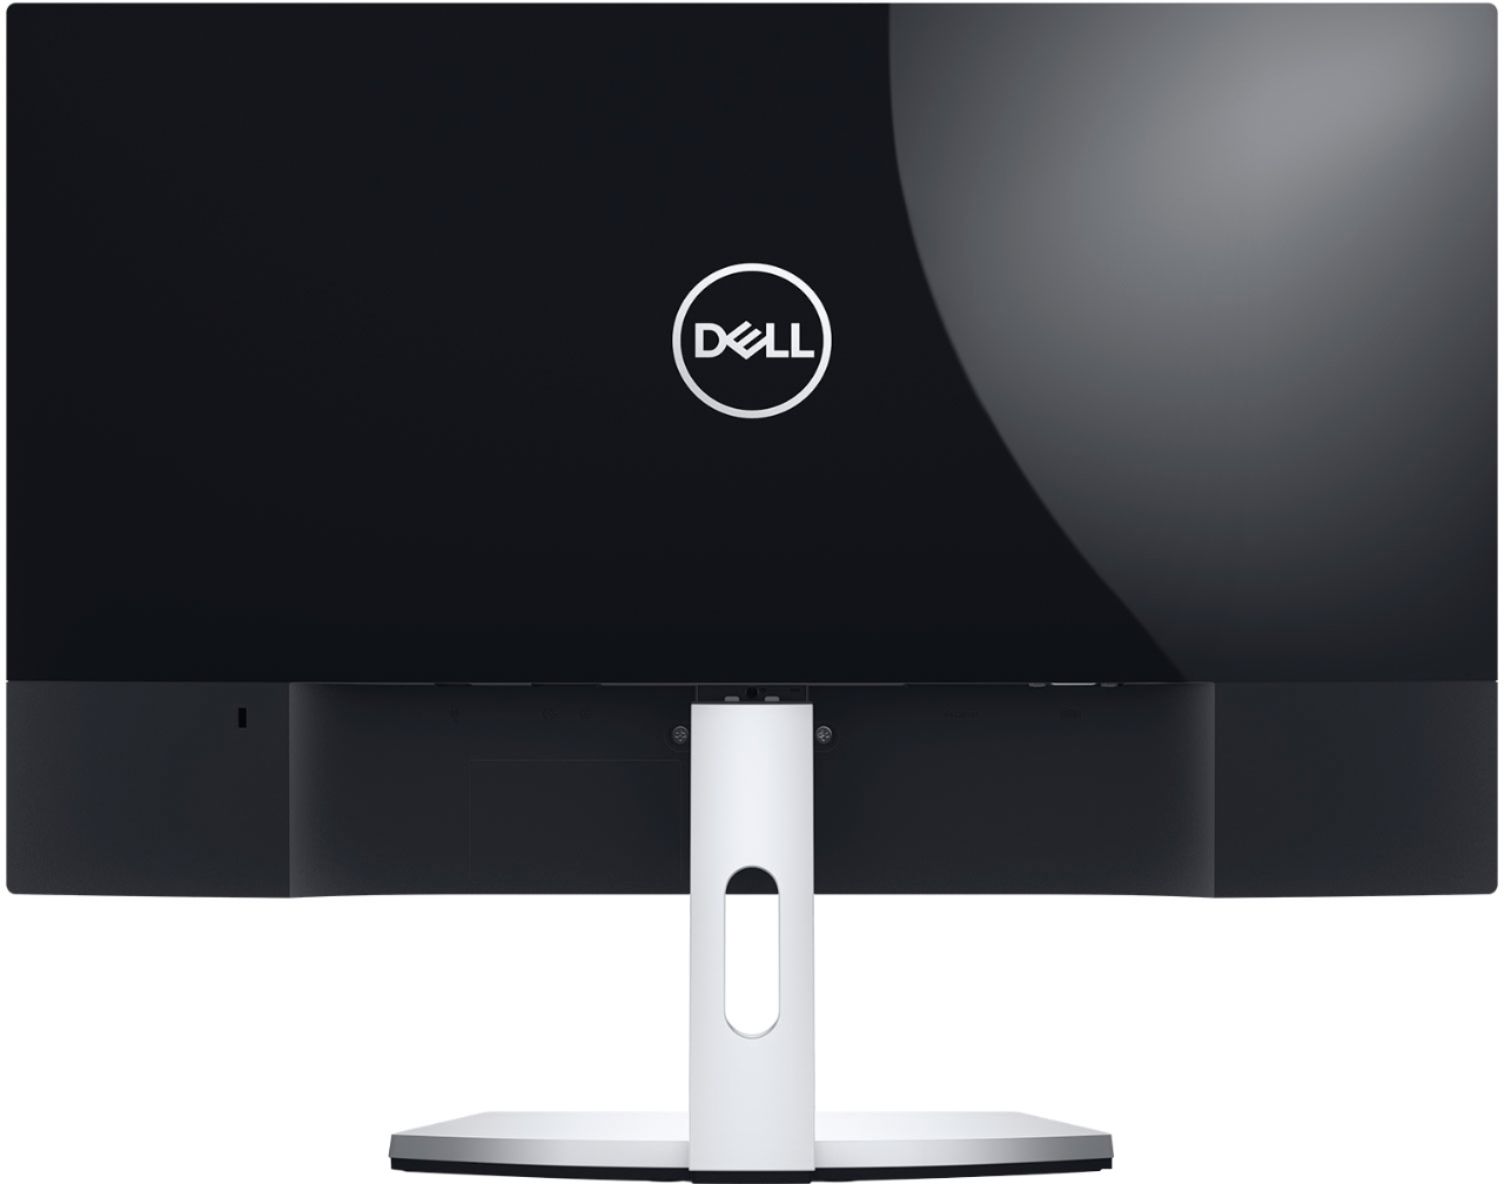 Back View: Dell - Geek Squad Certified Refurbished 23" IPS LED FHD Monitor - Black/Silver